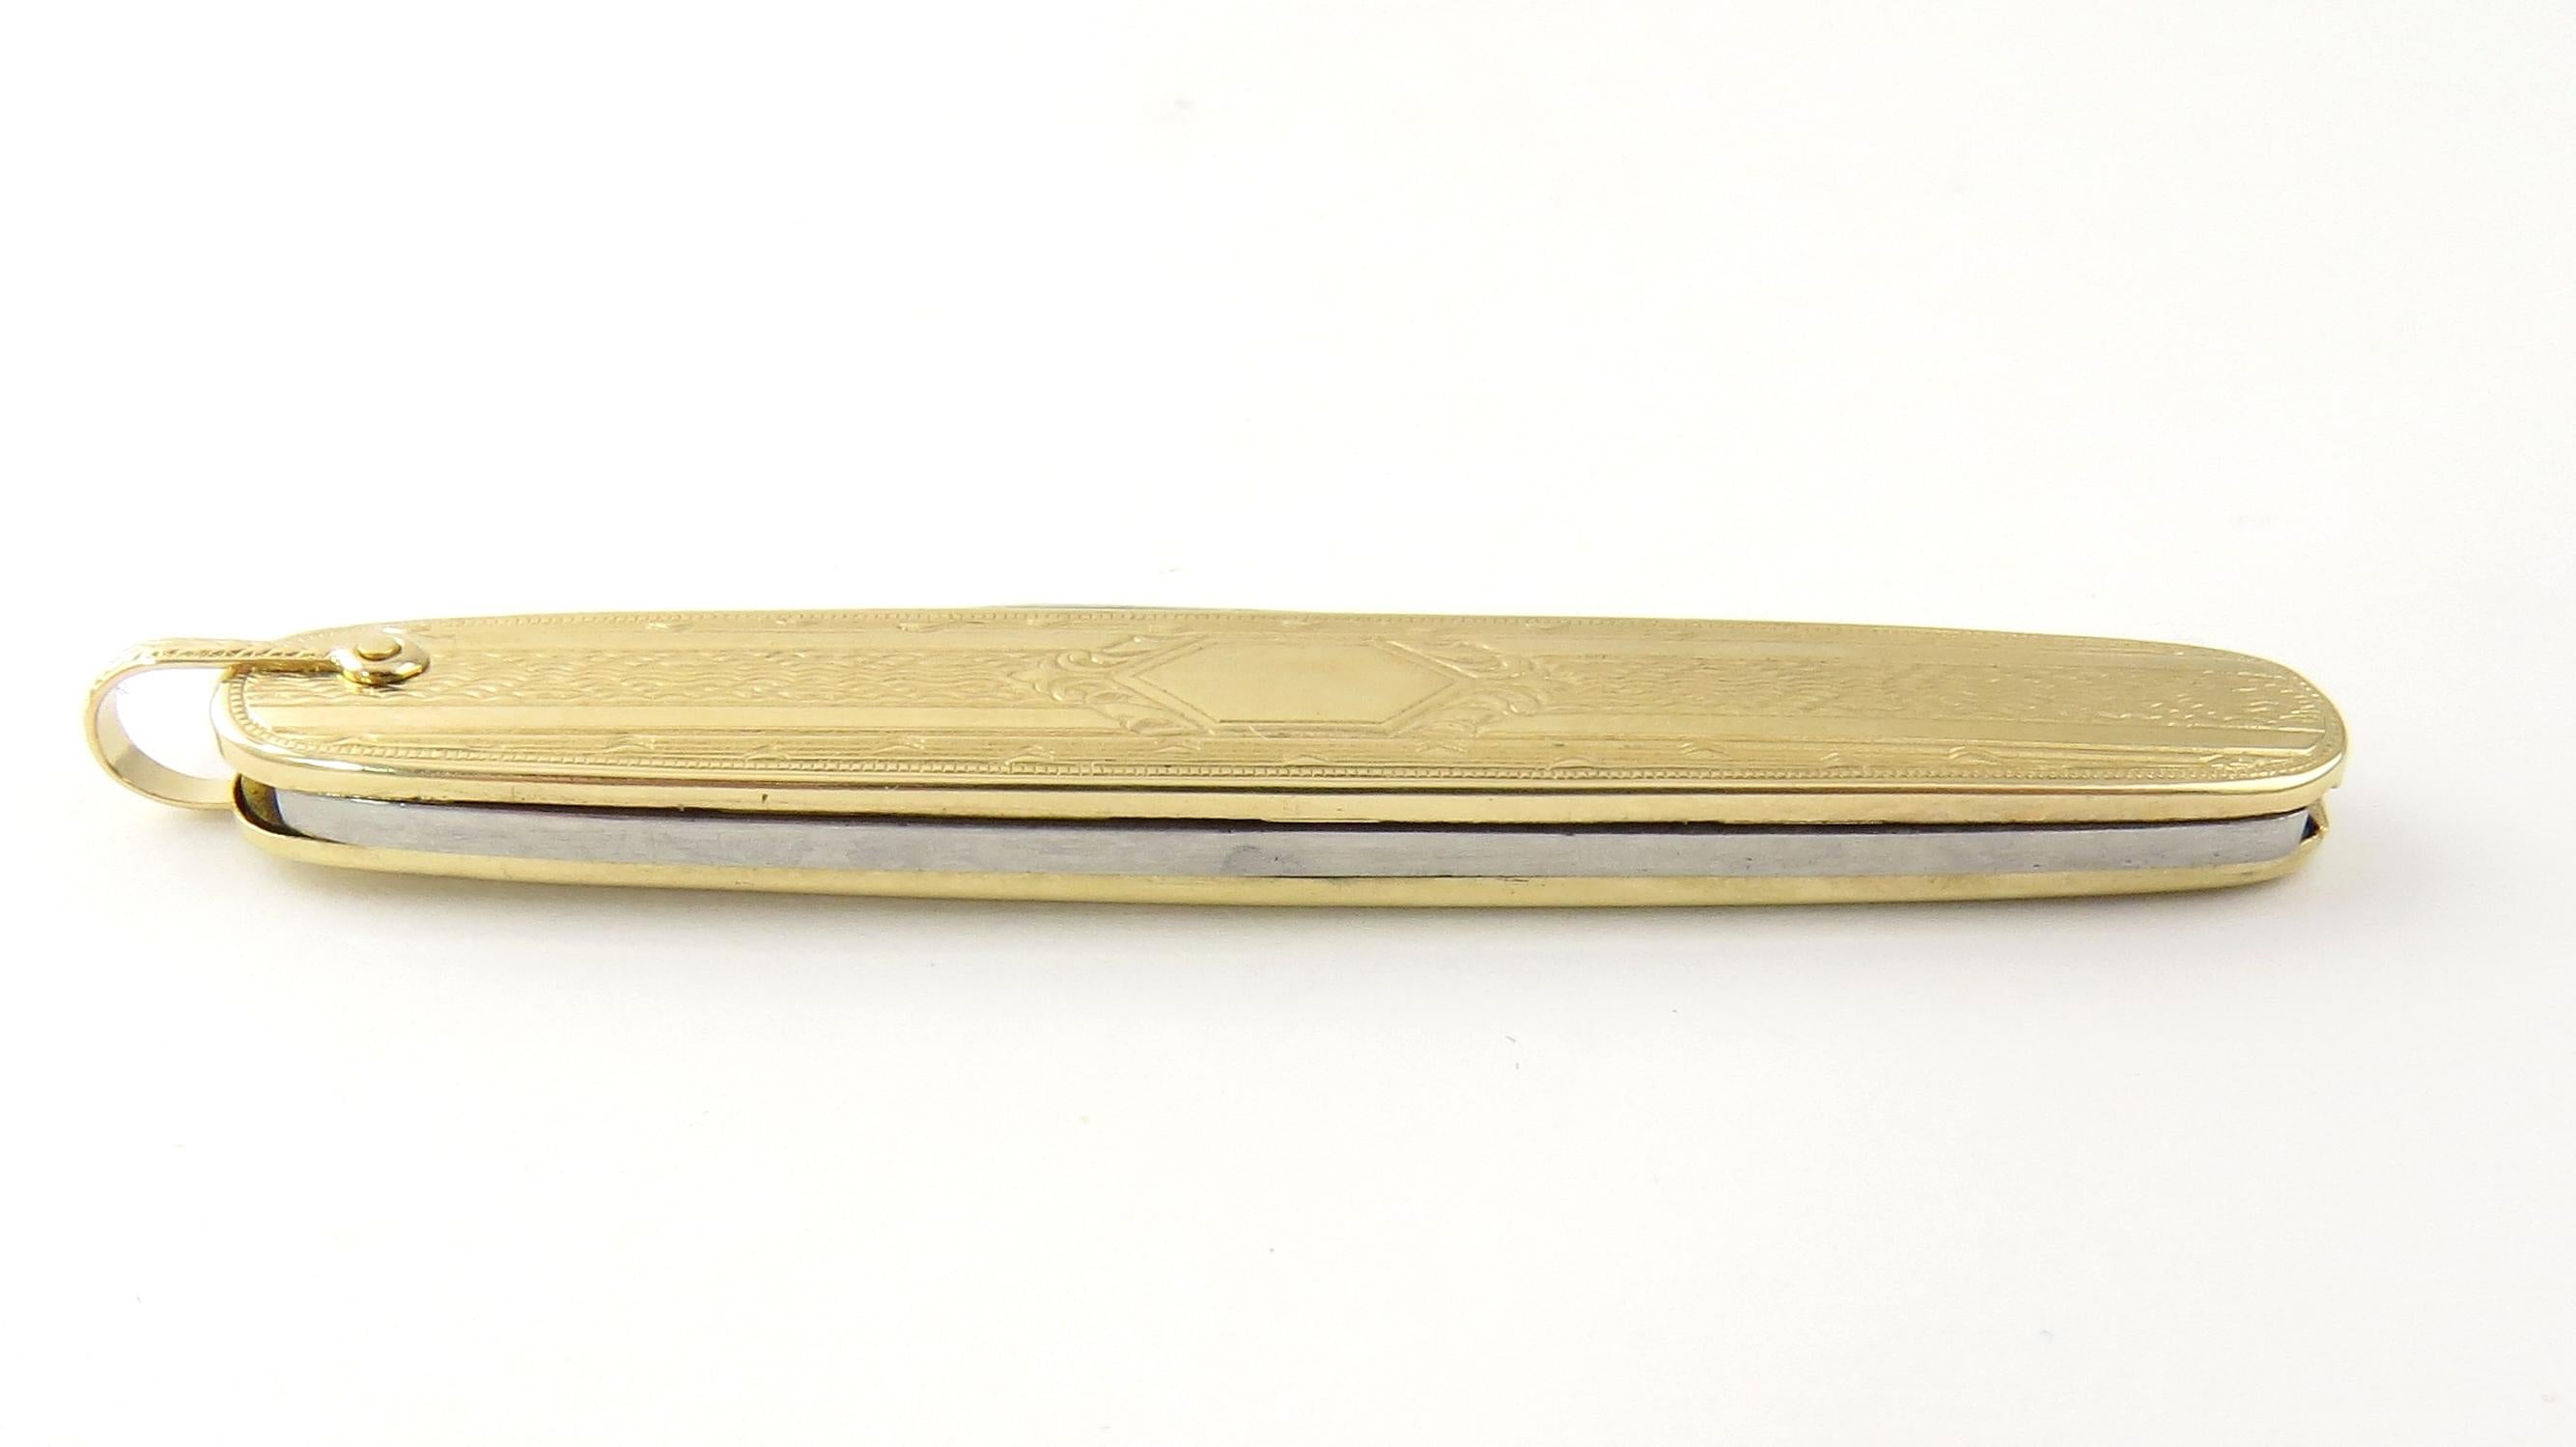 Vintage 14 Karat Yellow Gold and Stainless Steel Pocket Knife

This lovely pocket knife features two stainless steel blades housed in a textured 14K gold case with a polished bar on which a monogram can be engraved.

Size: 67 mm x 14 mm

Weight: